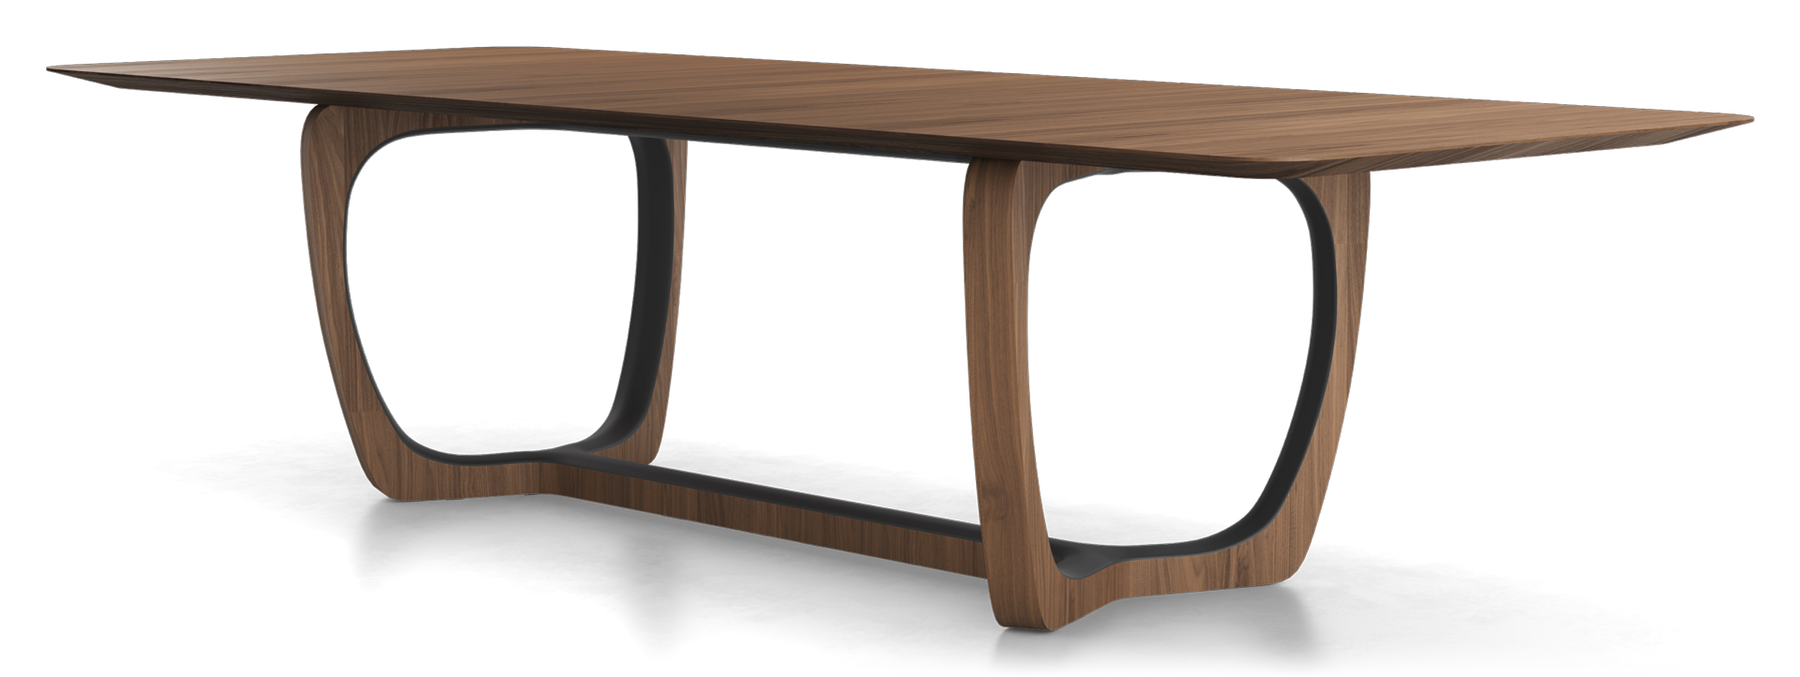 Lisson Dining Table